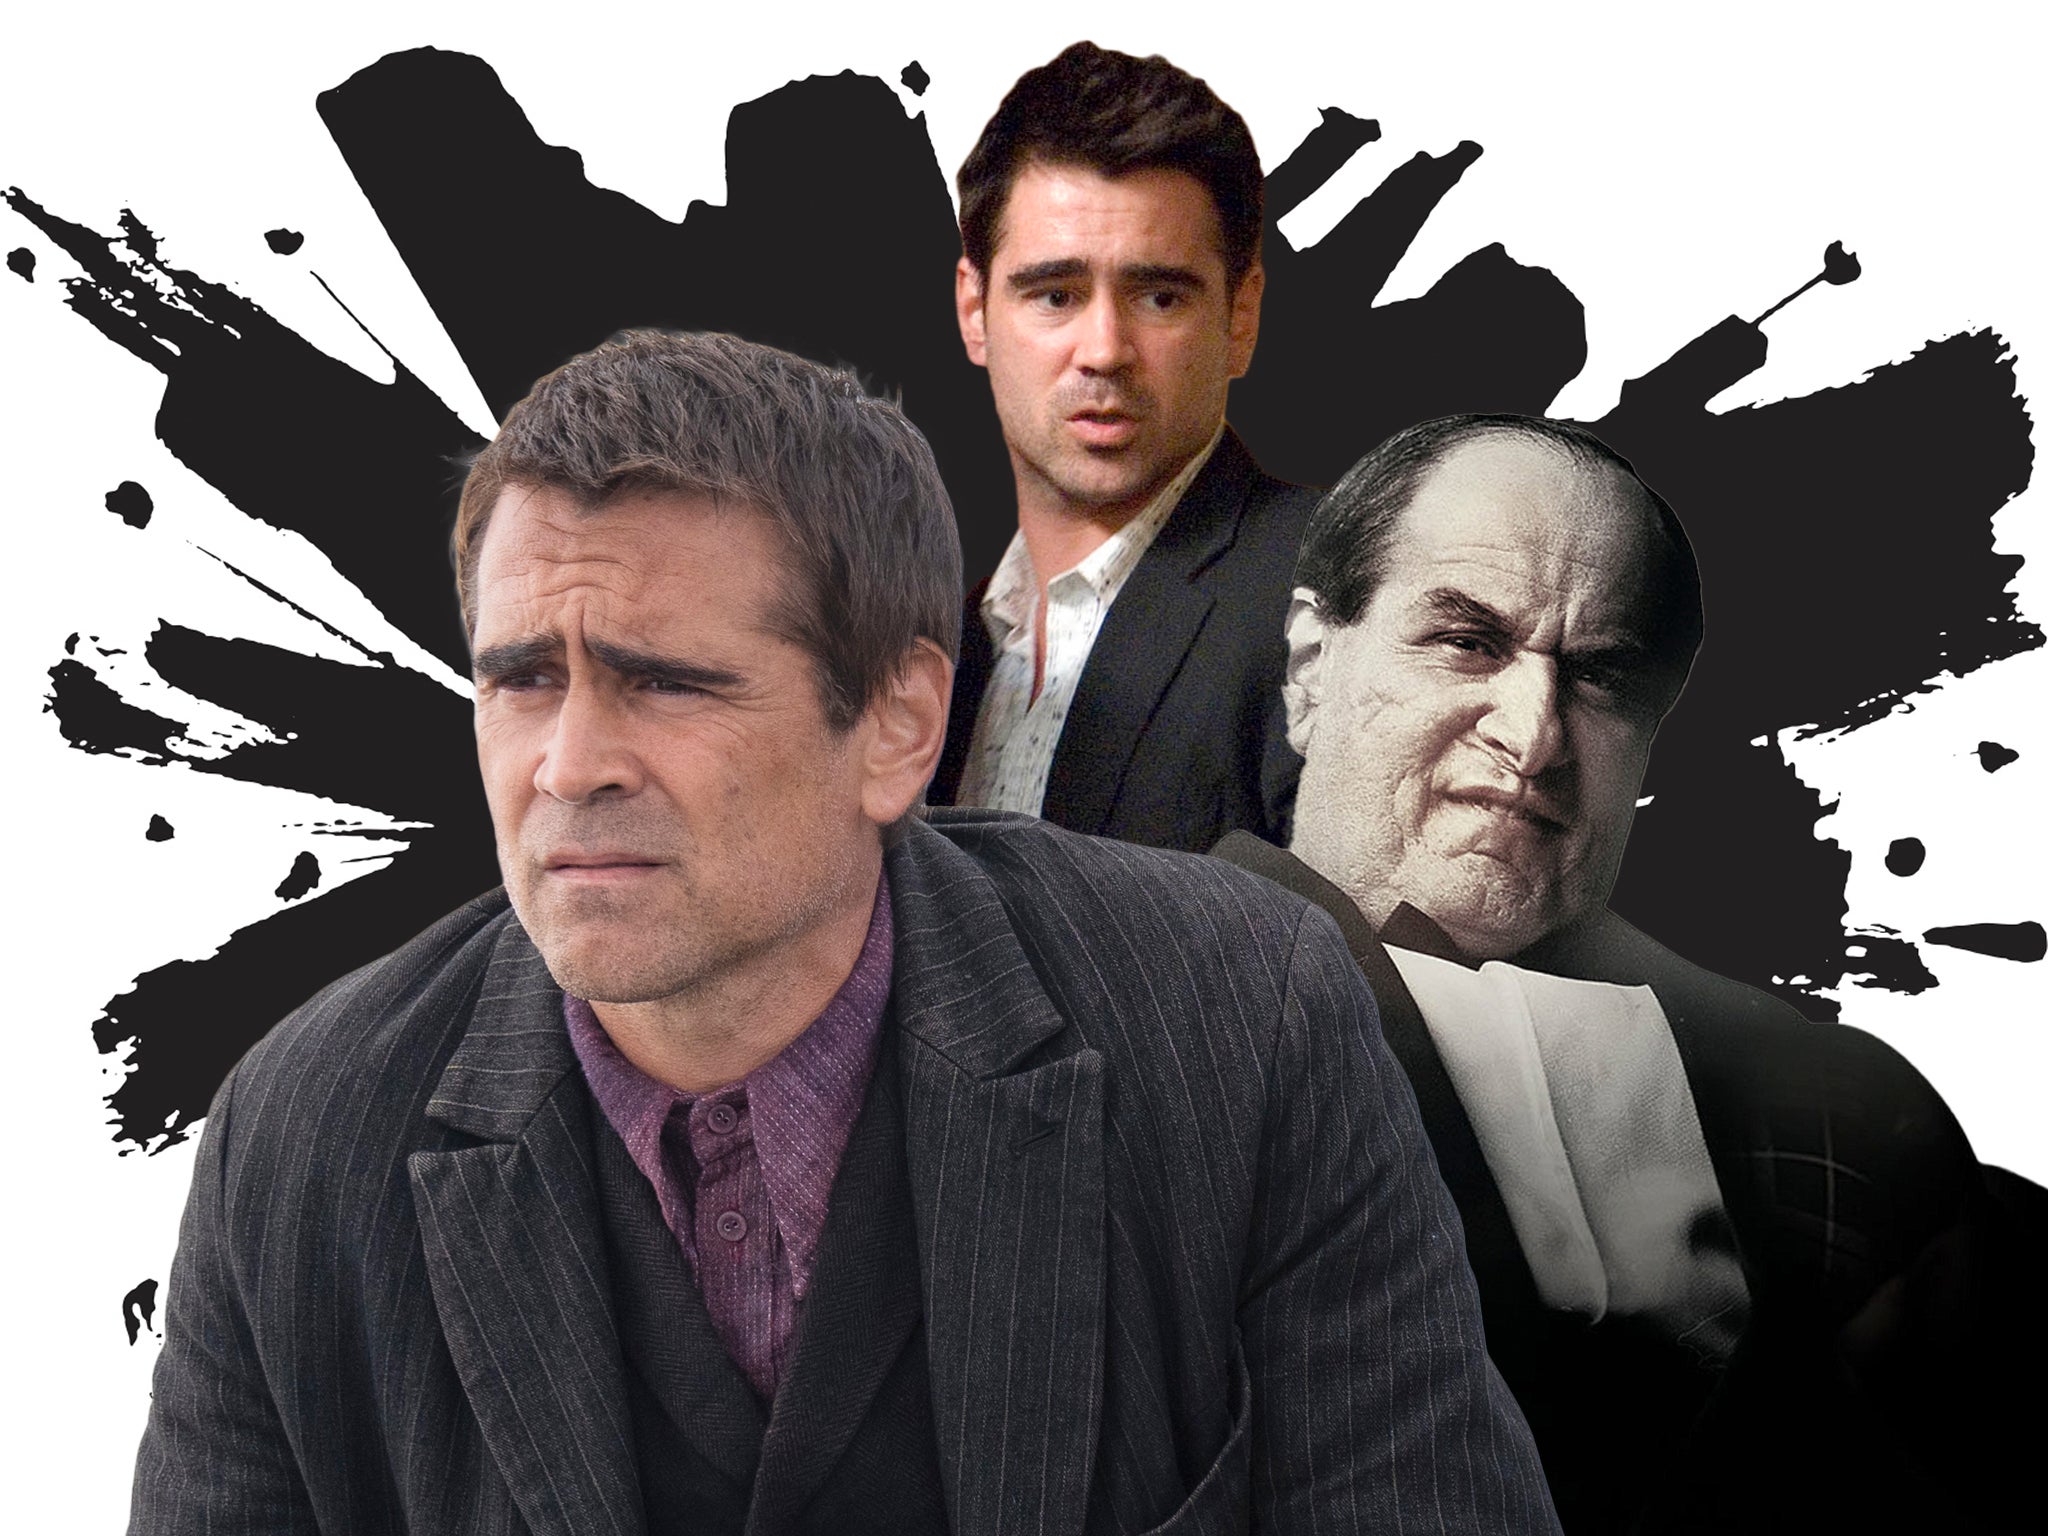 <p>Range: Colin Farrell in ‘The Banshees of Inisherin’, ‘In Bruges’ and ‘The Batman’ </p>